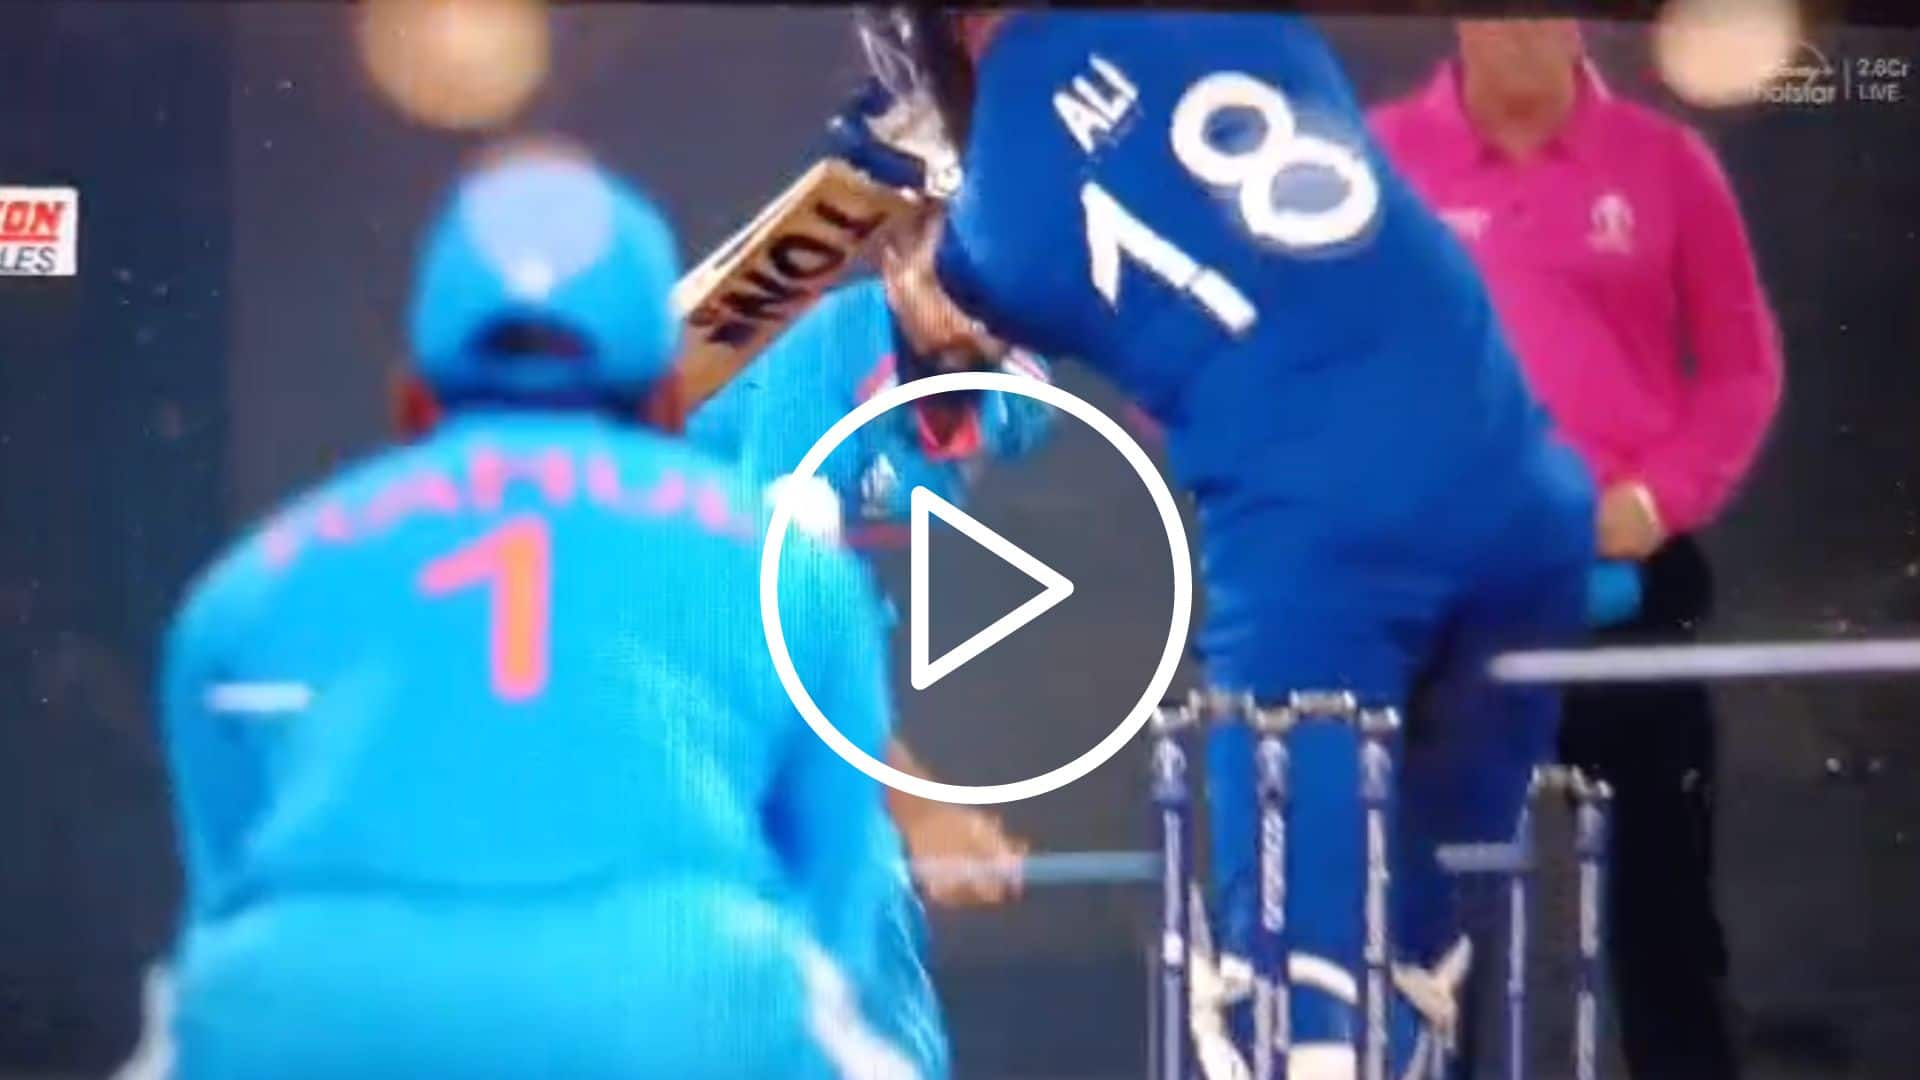 [Watch] Shami Strikes The Iron Hot As He Rattles Moeen Ali With A Peach